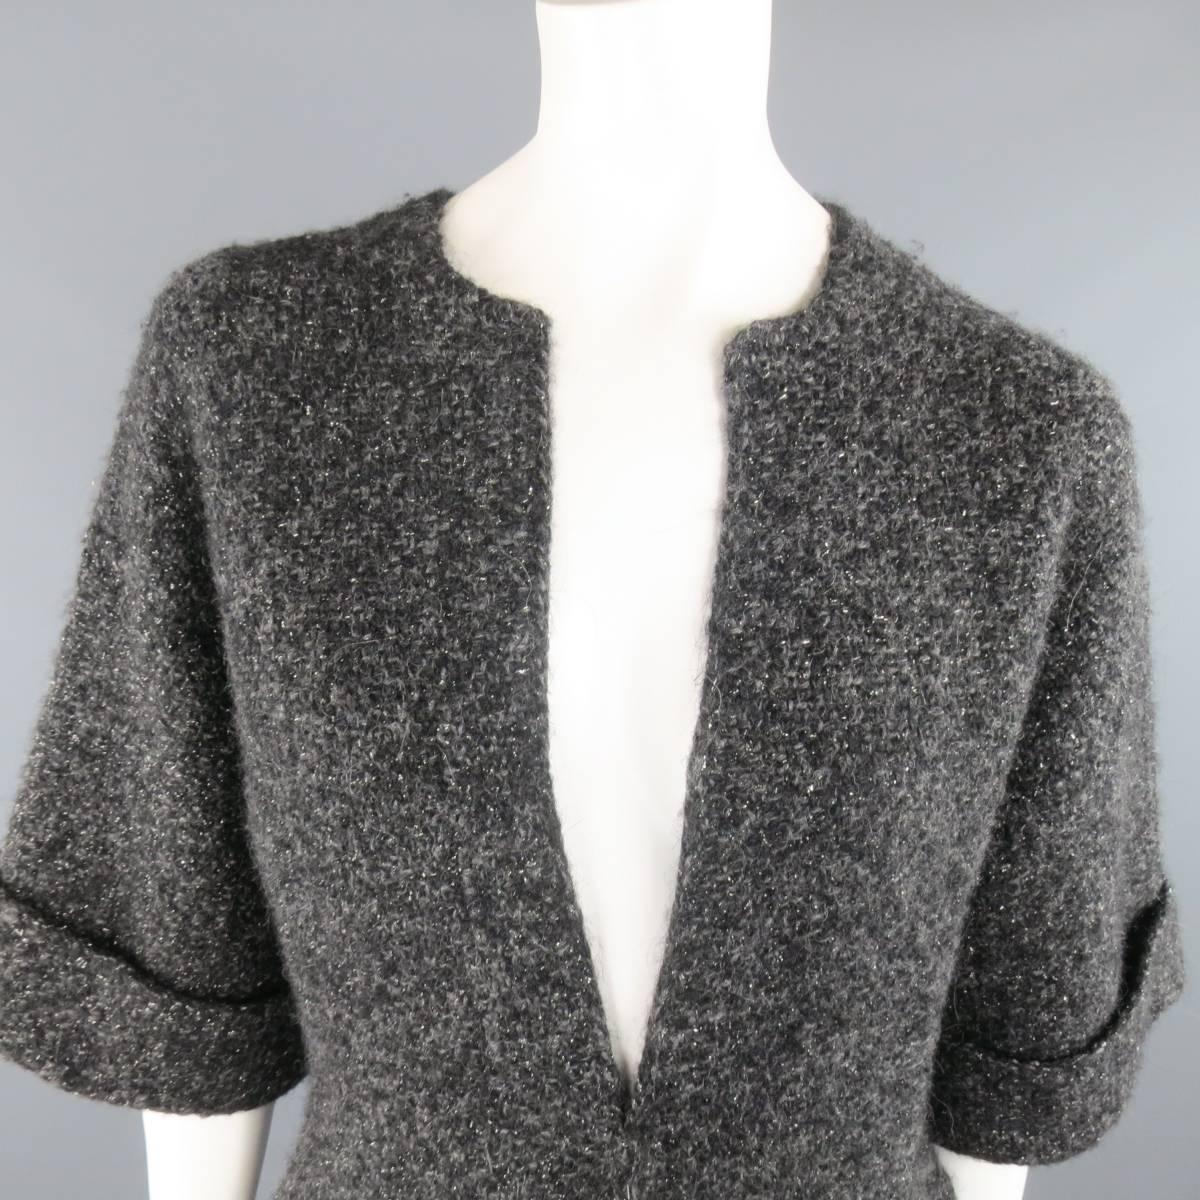 RALPH LAUREN BLACK LABEL cardigan coat comes in a sparkly, metallic, wool, cashmere Hetaher boucle knit and features a round neckline, open front, slit pockets, and three quarter cuffed sleeves.
 
Excellent Pre-Owned Condition.
Marked: S
